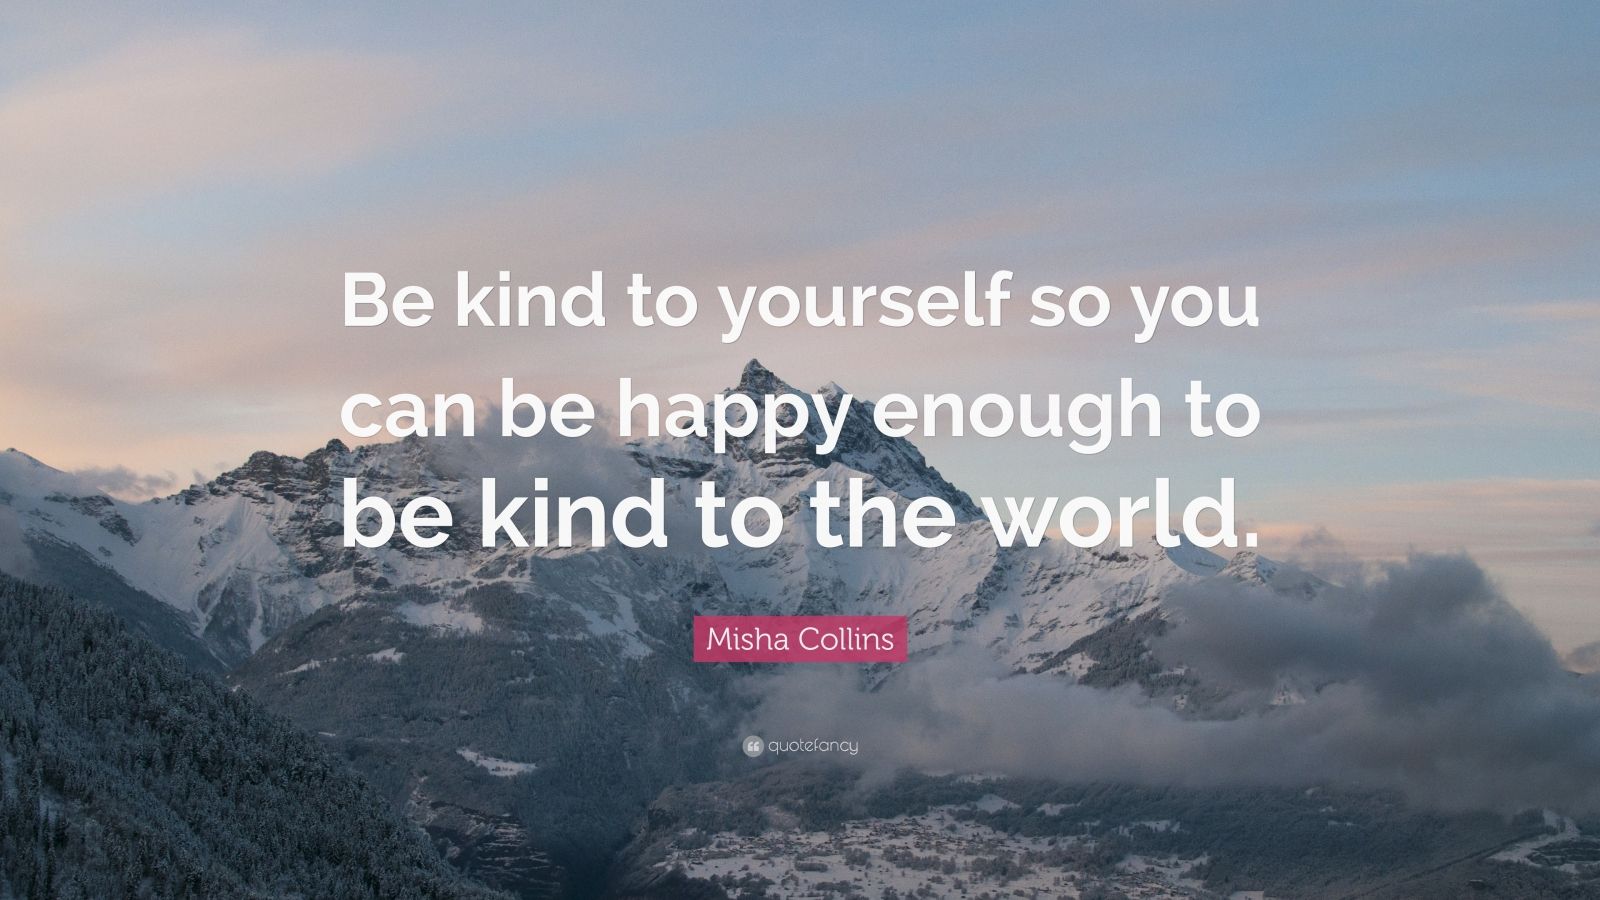 Misha Collins Quote: “Be kind to yourself so you can be happy enough to ...